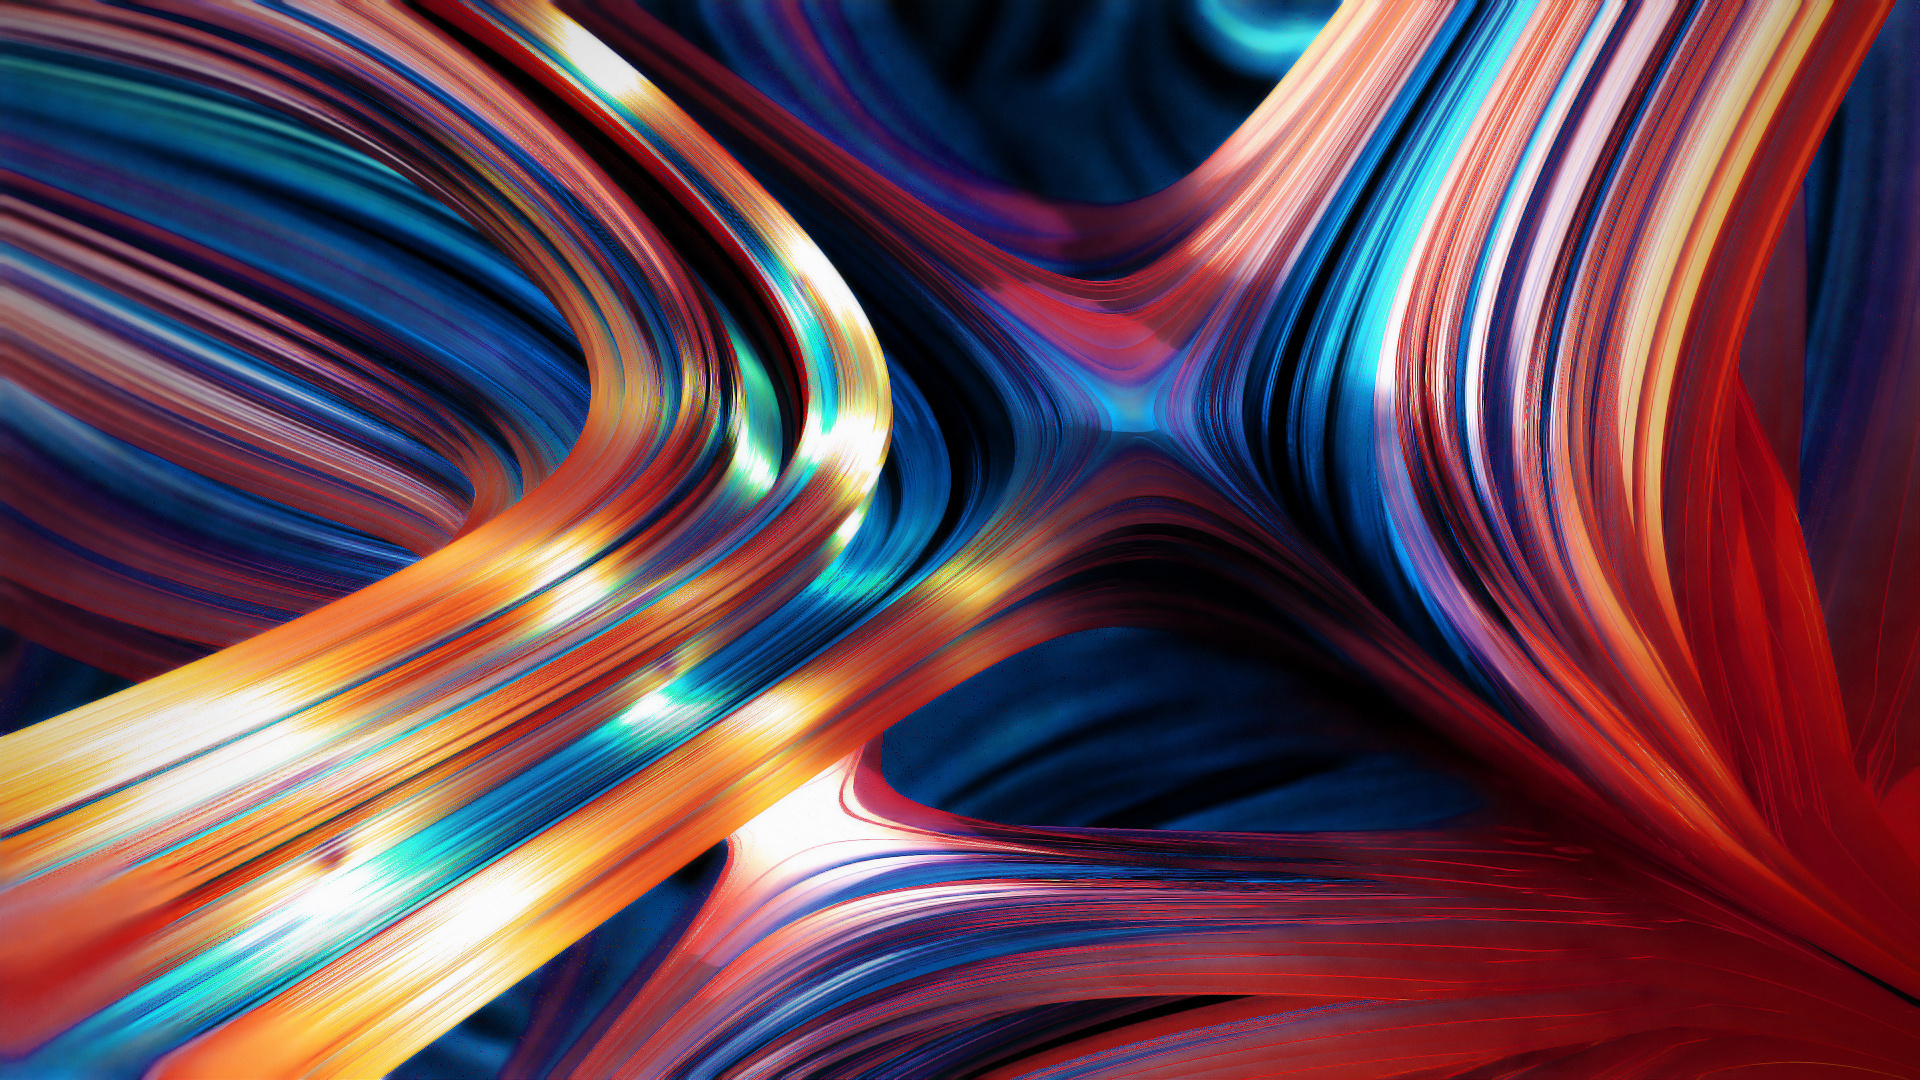 Red and Blue Abstract Painting. Wallpaper in 1920x1080 Resolution